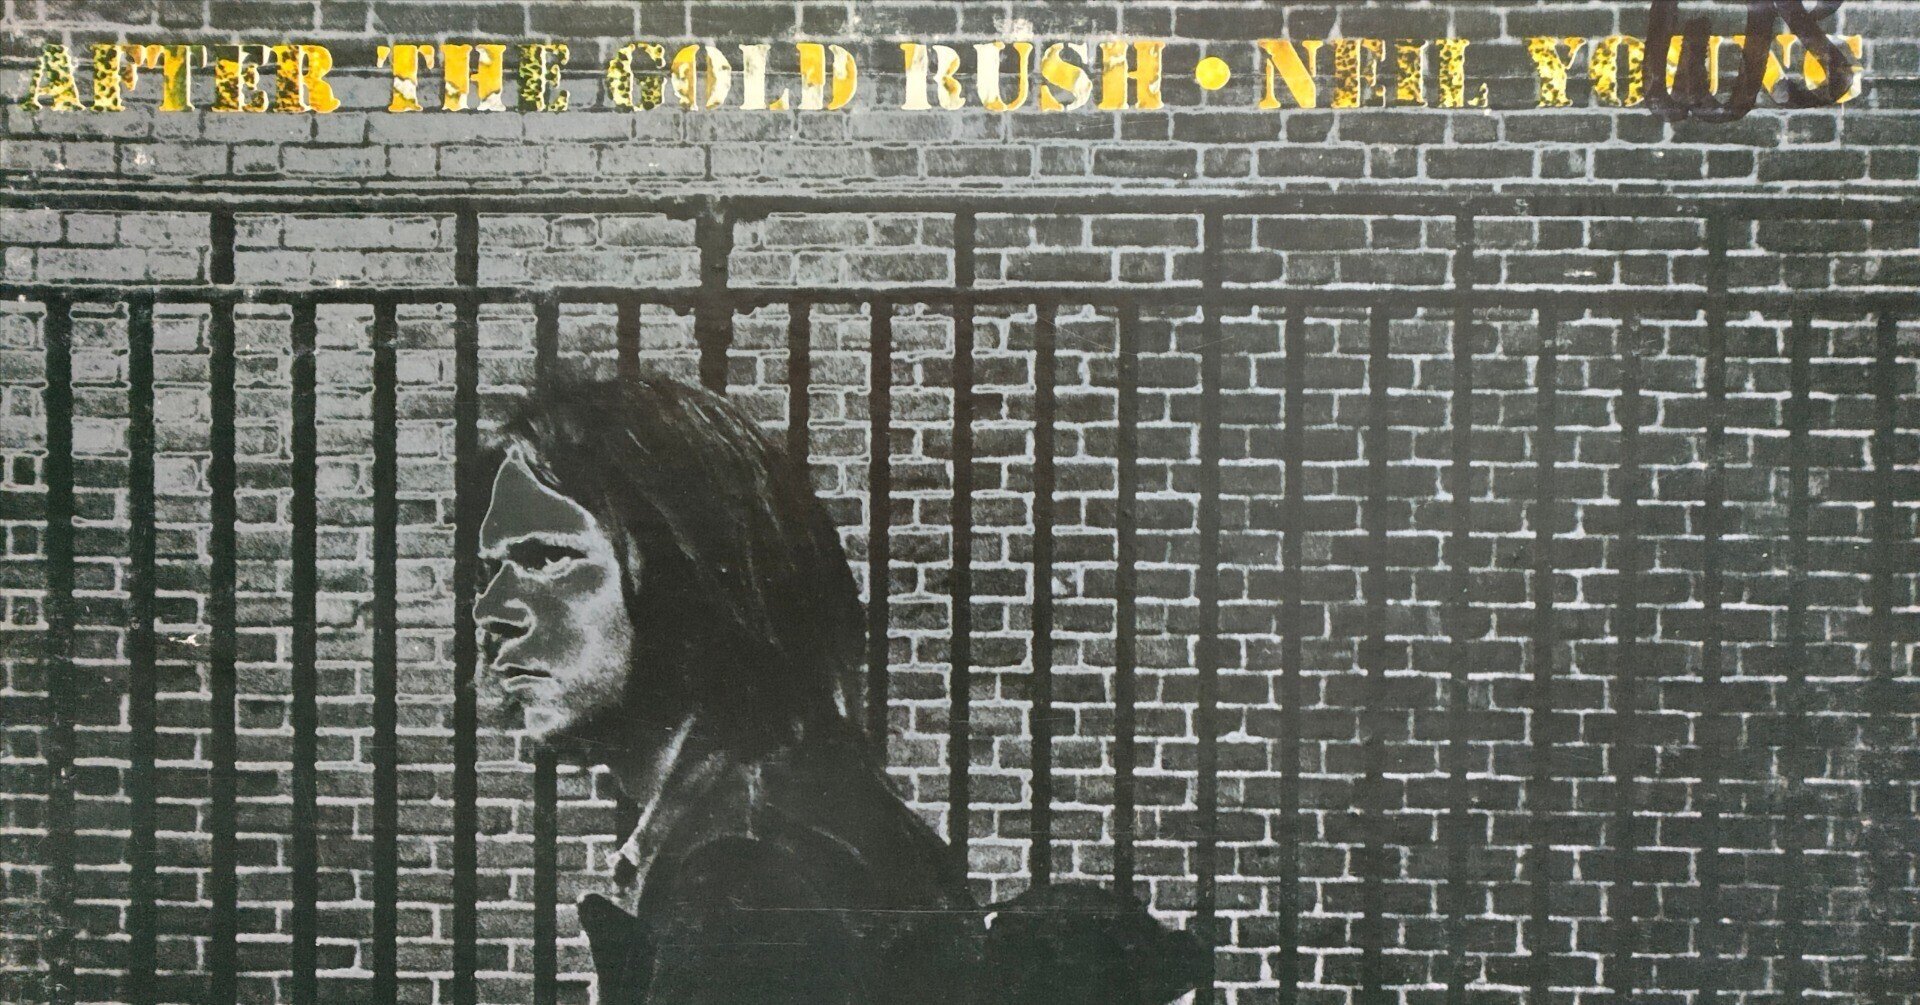 After the Gold Rush】(1970) Neil Young 名曲、名演が詰まった代表作3rdアルバム｜よっしー